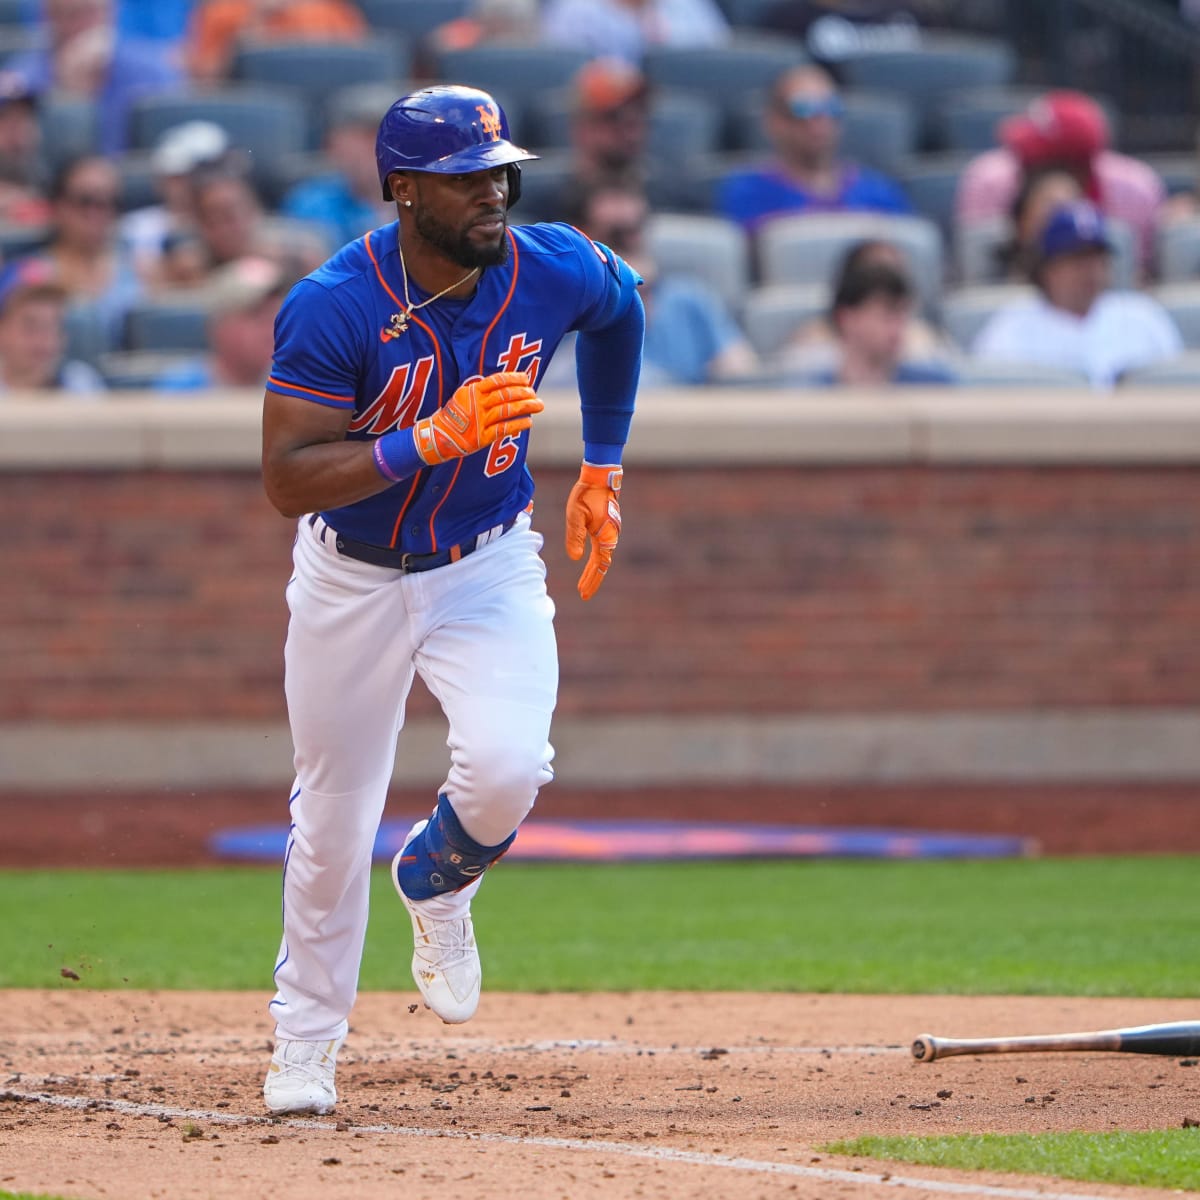 After missing Starling Marte in 2023, what can the Mets expect